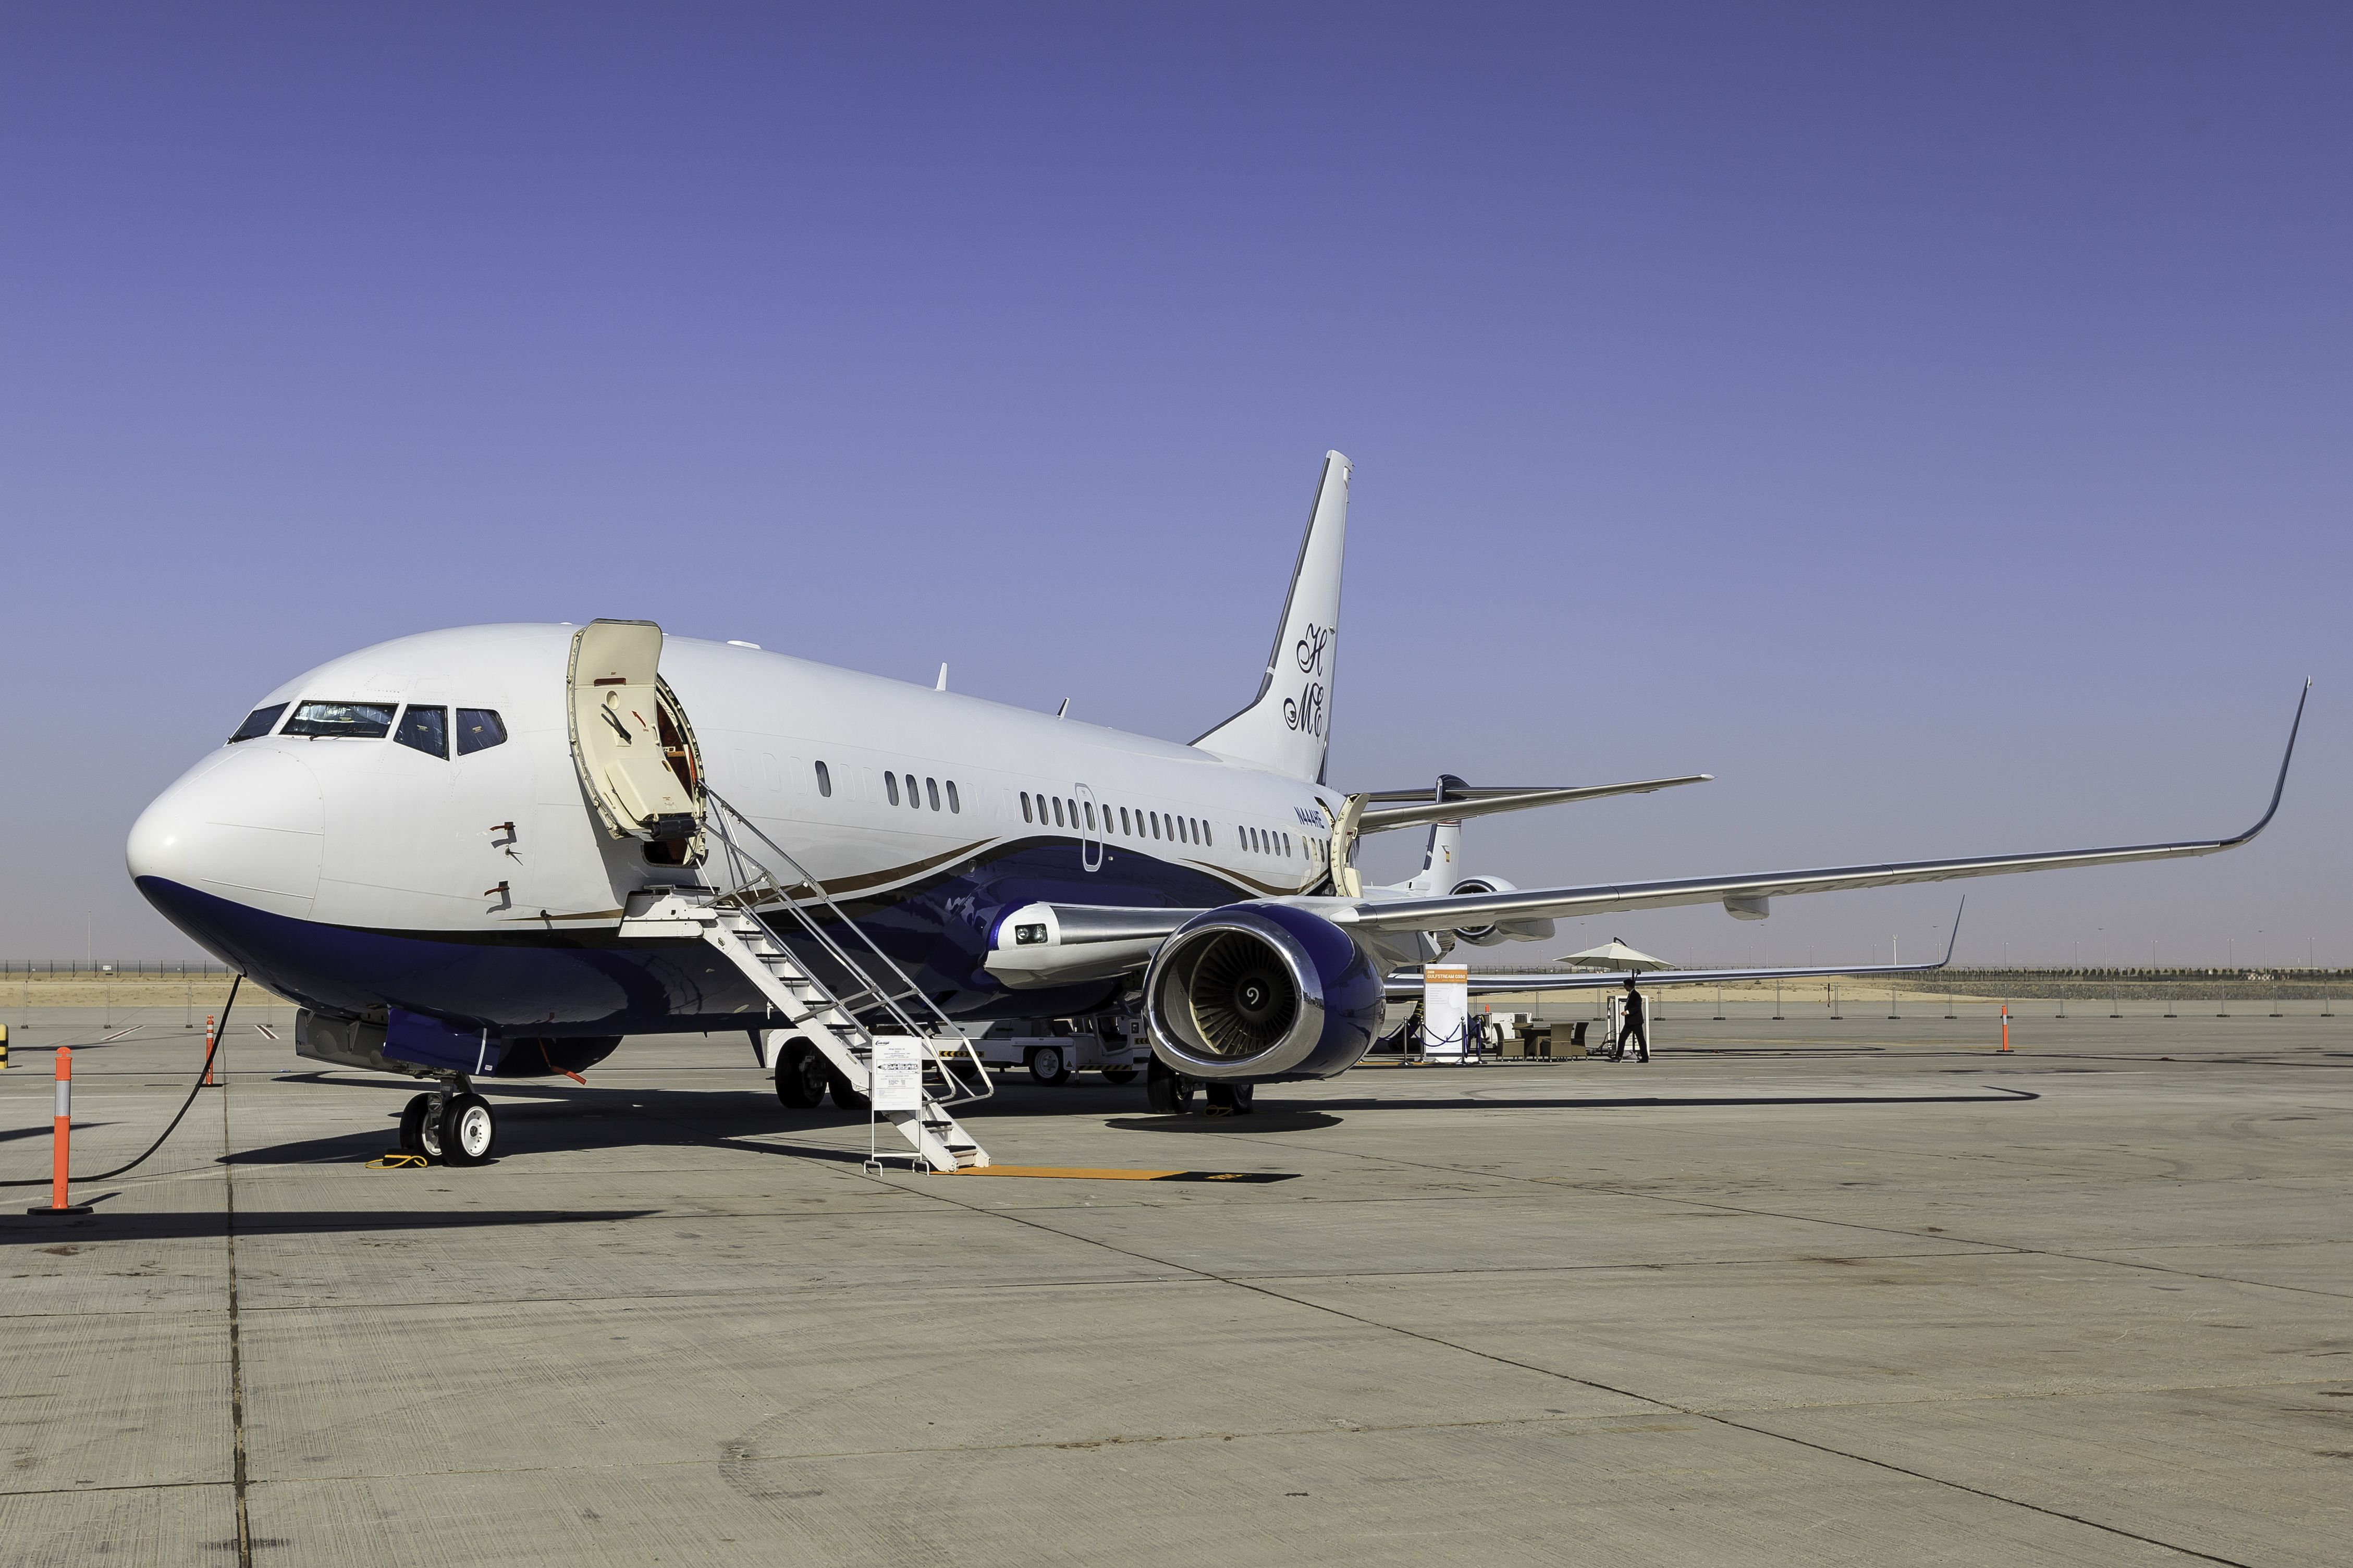 A Boeing BBJ 737 parked at an airport.